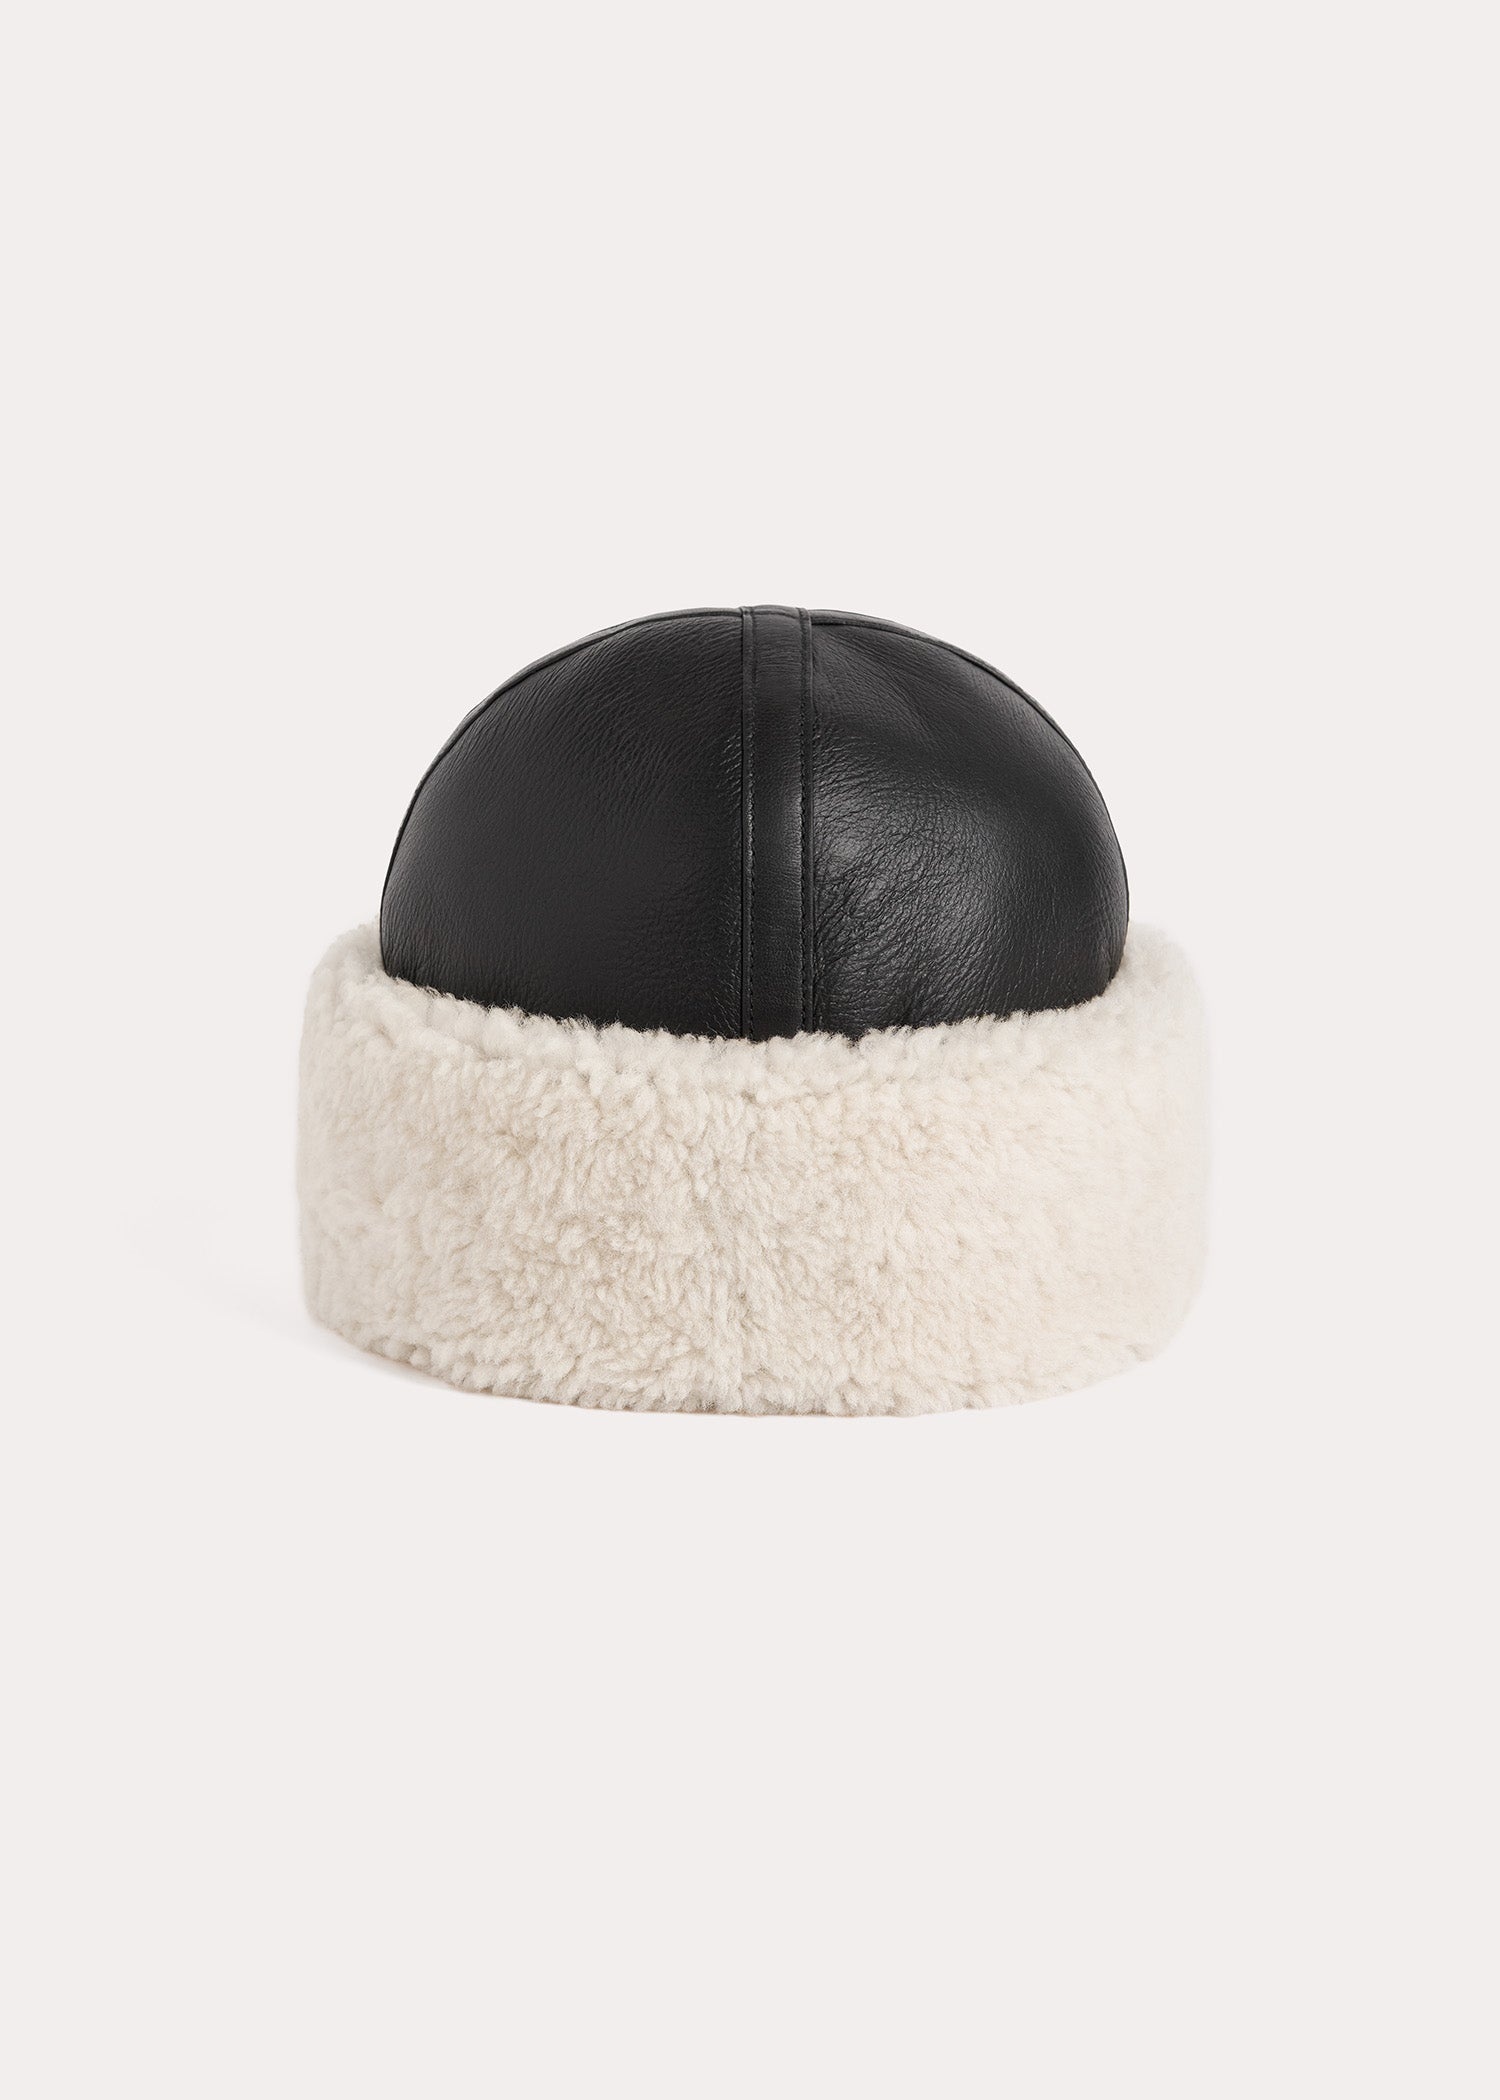 Shearling winter hat black/off white - 4